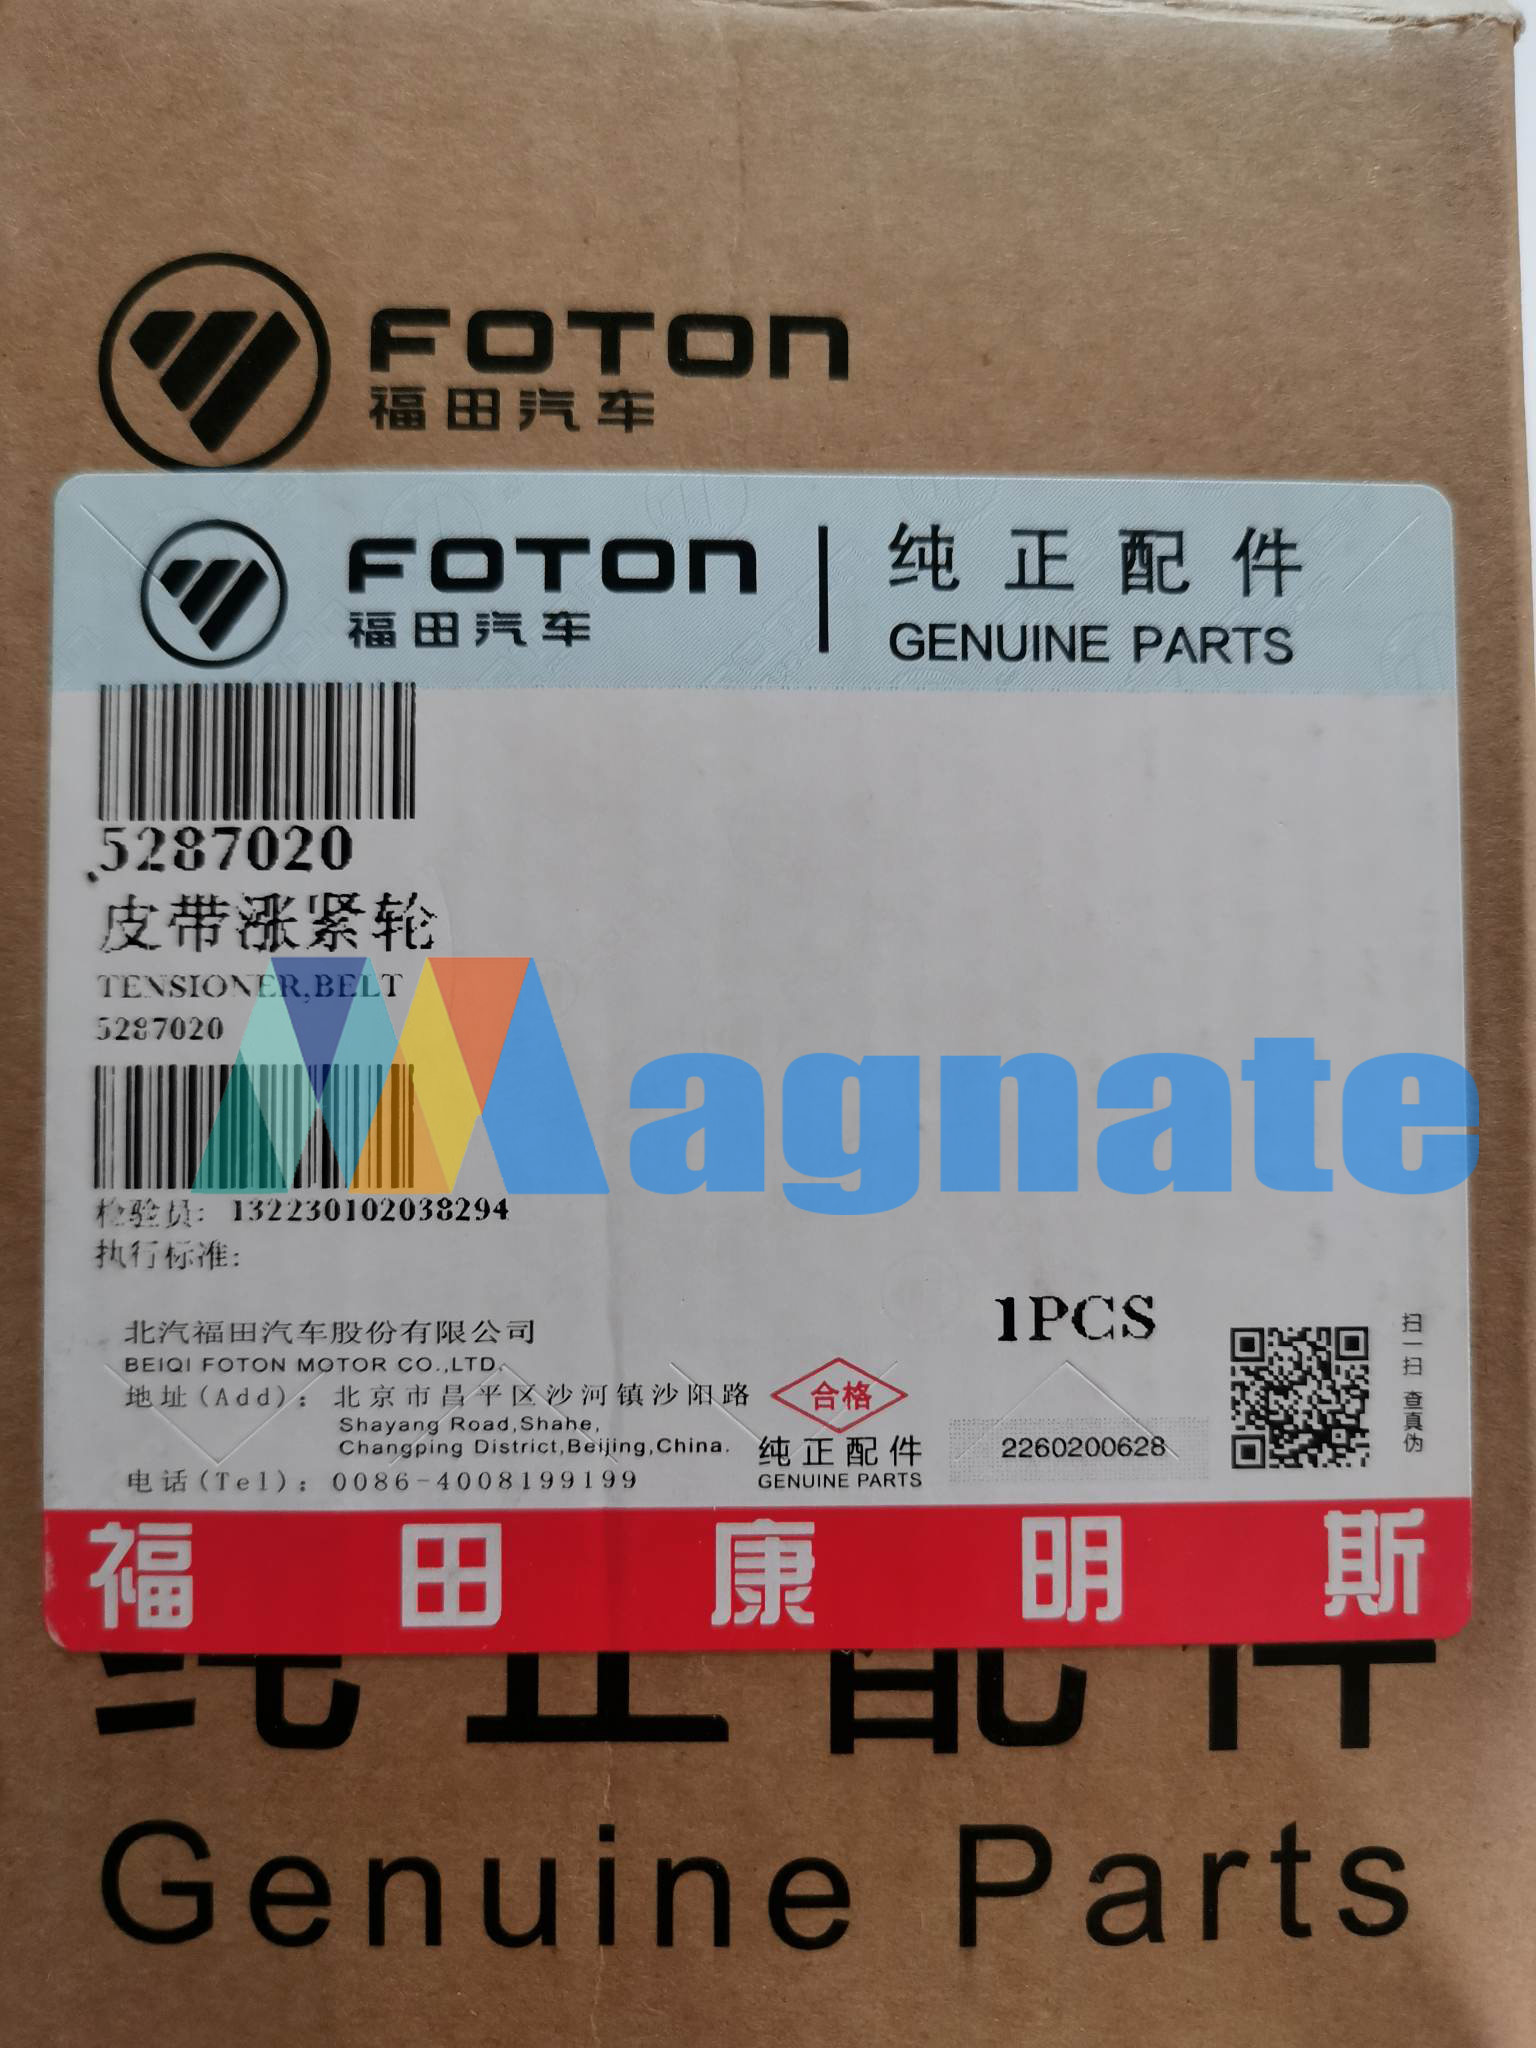 Brand: Foton Belt Tensioner PN: 5287020 Weight 1.5kg Dimensions : 4 x 4 x 7 inches